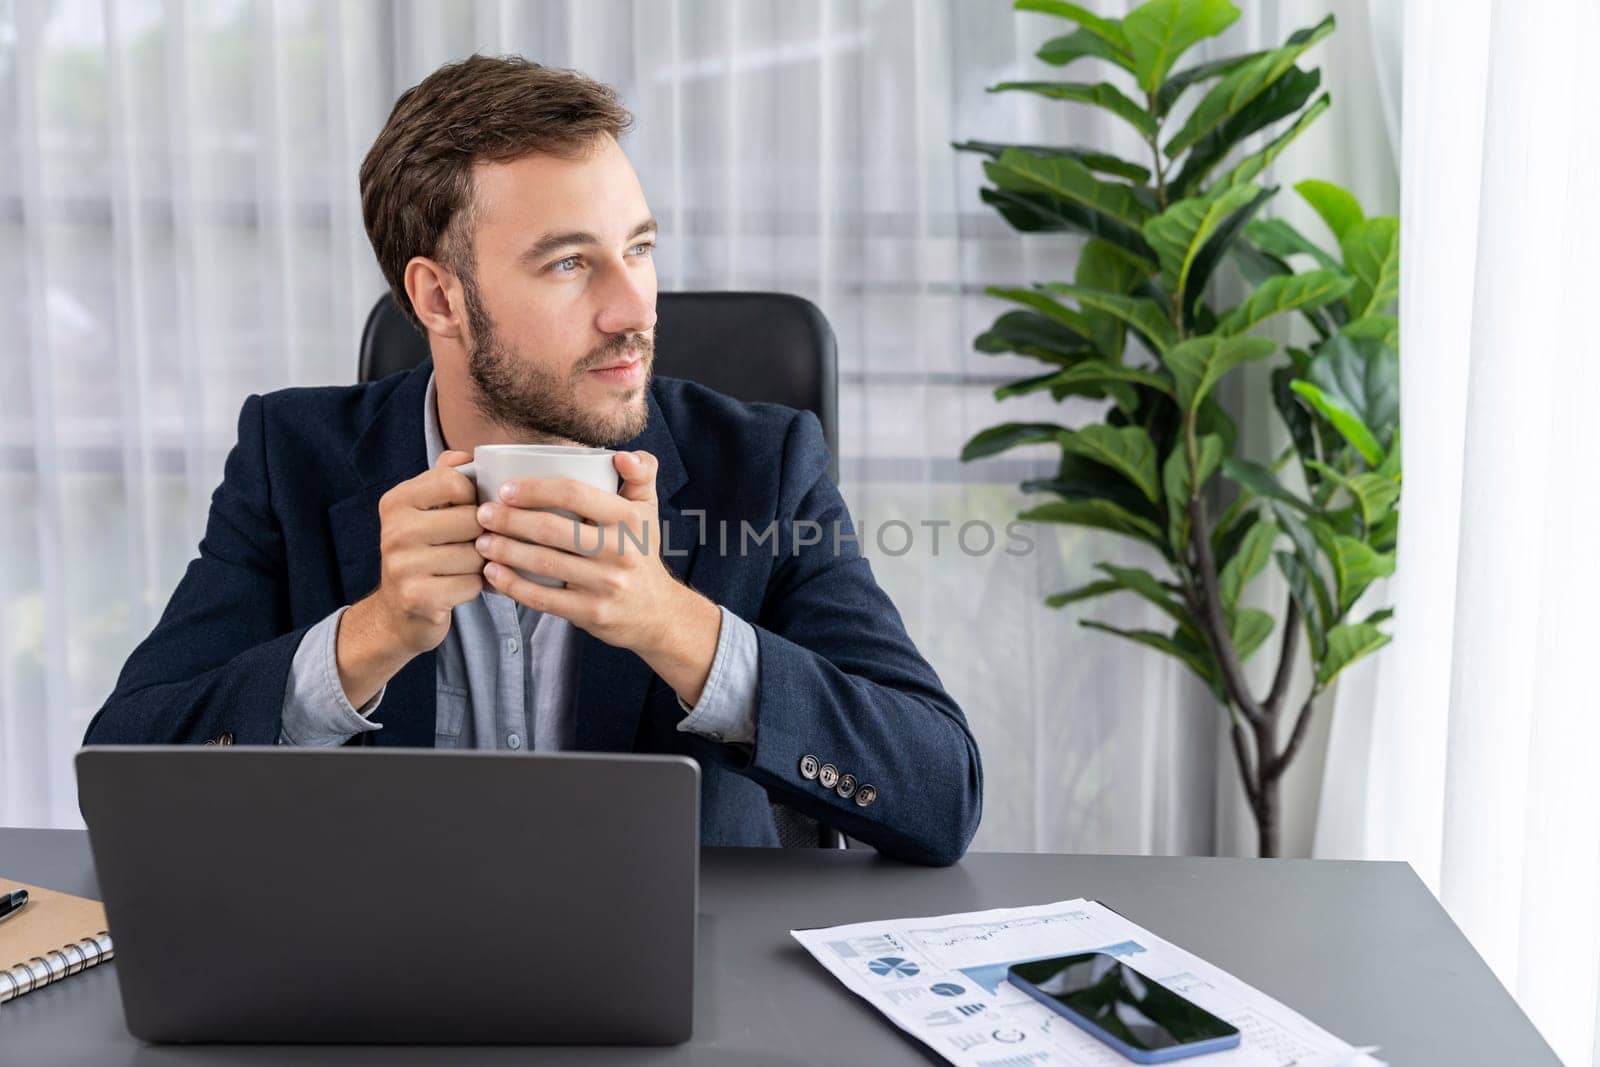 Businessman working on his laptop and drinking coffee at his desk in workspace. Smart executive taking coffee break after researching financial data and marketing plan on his corporate laptop. Entity